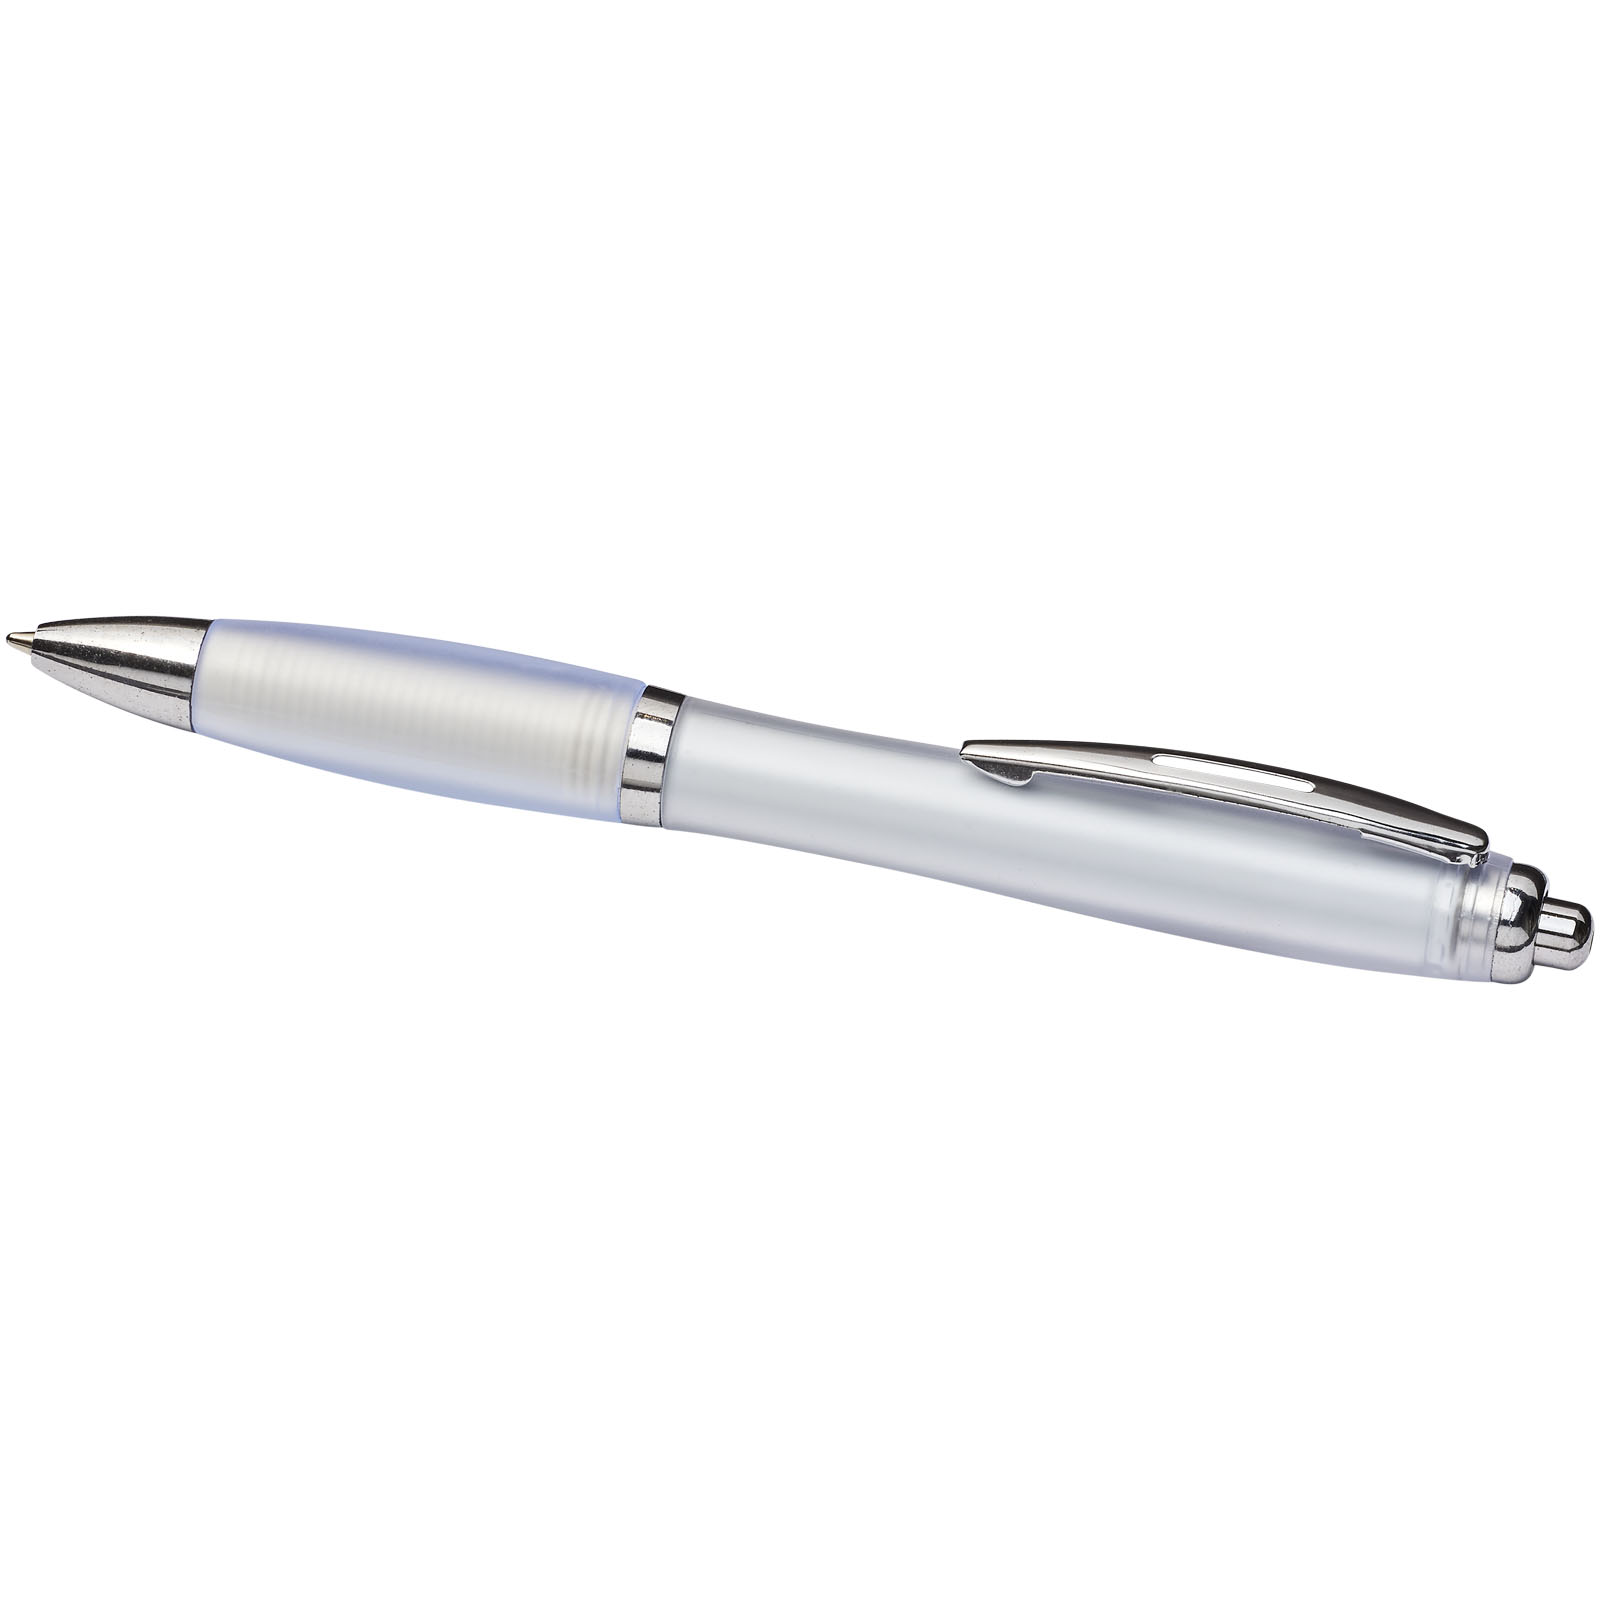 Advertising Ballpoint Pens - Curvy ballpoint pen with frosted barrel and grip - 2